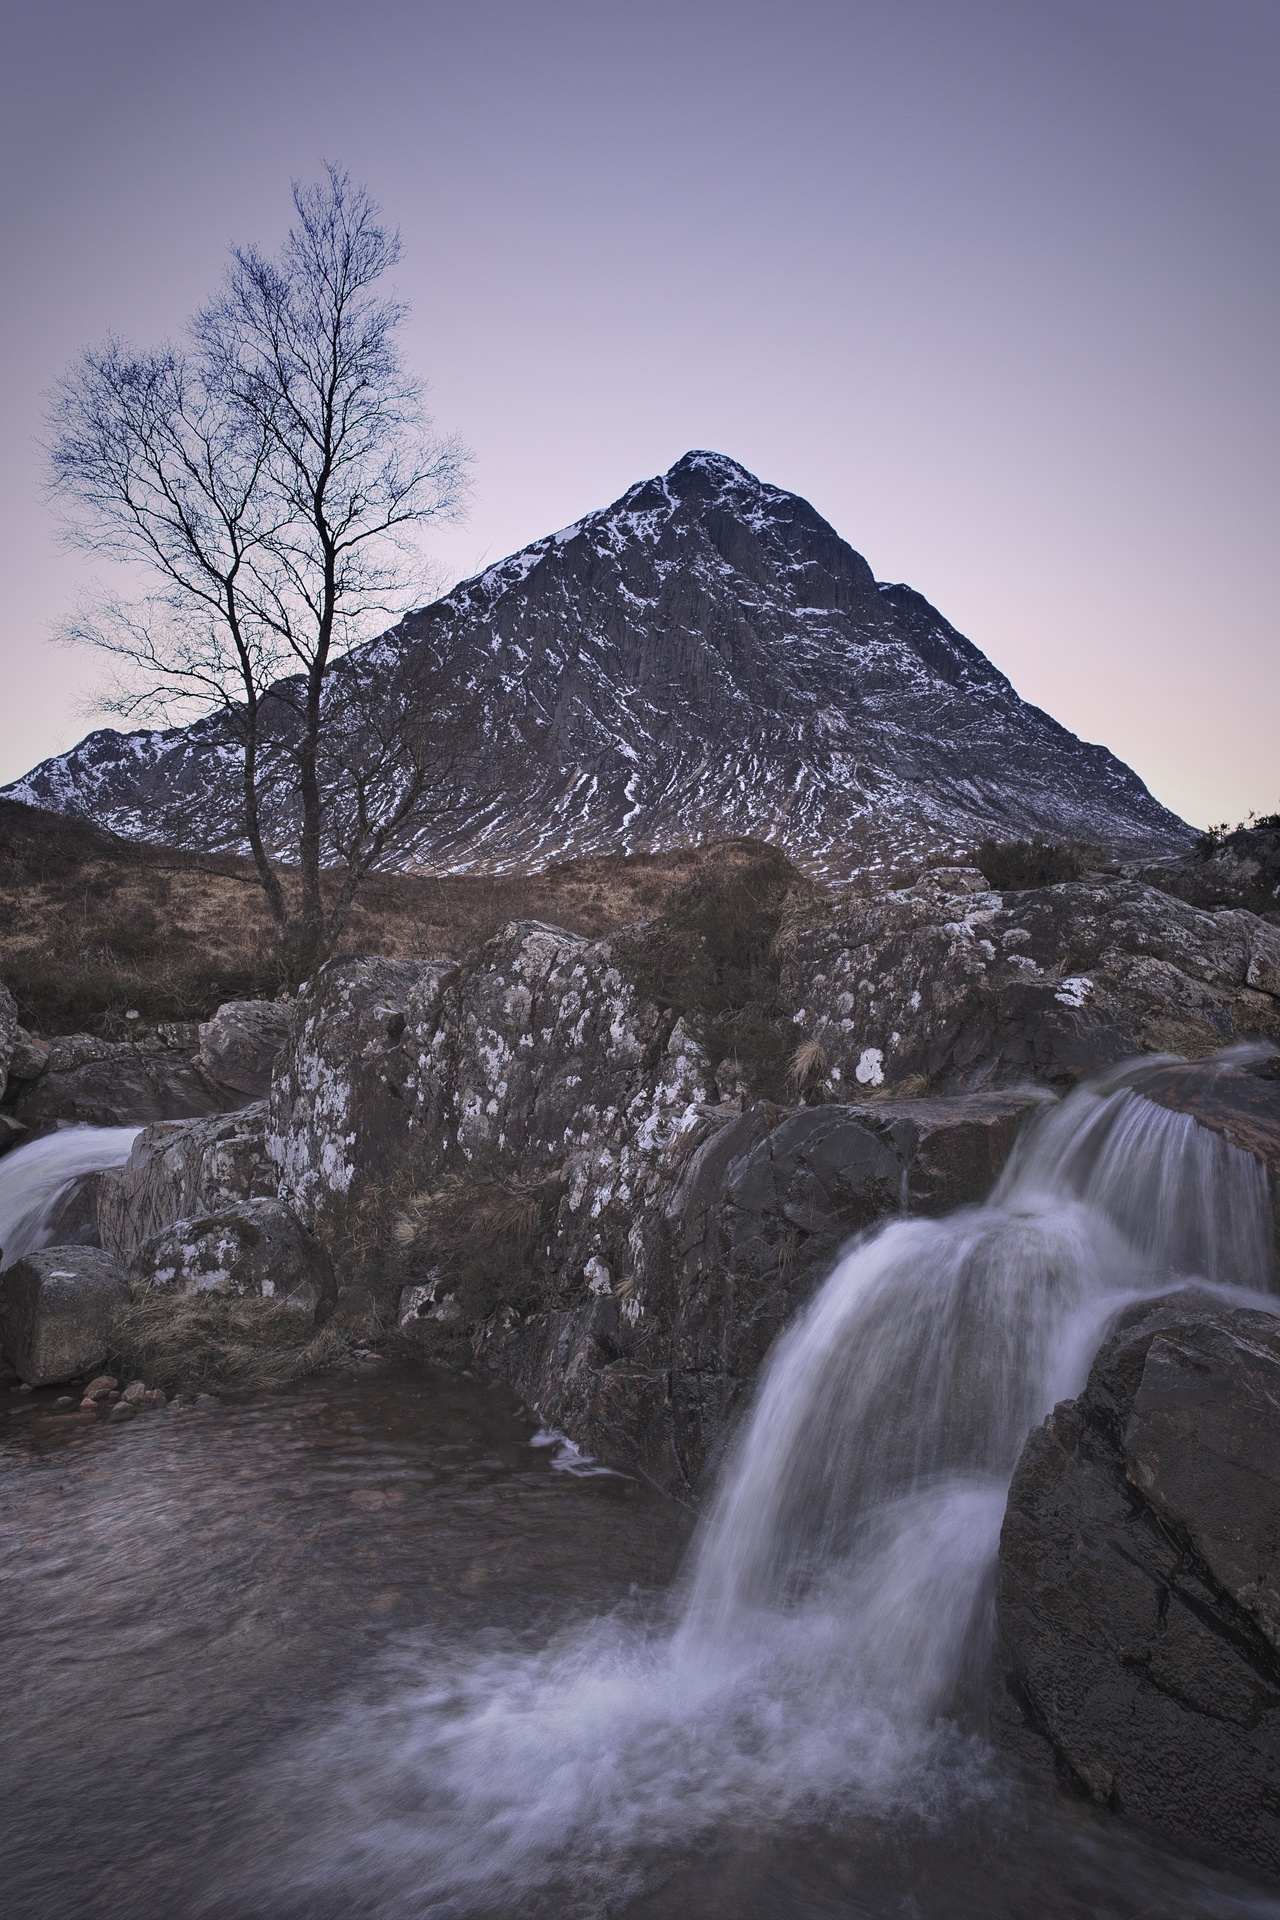 Display image: The Buachaille